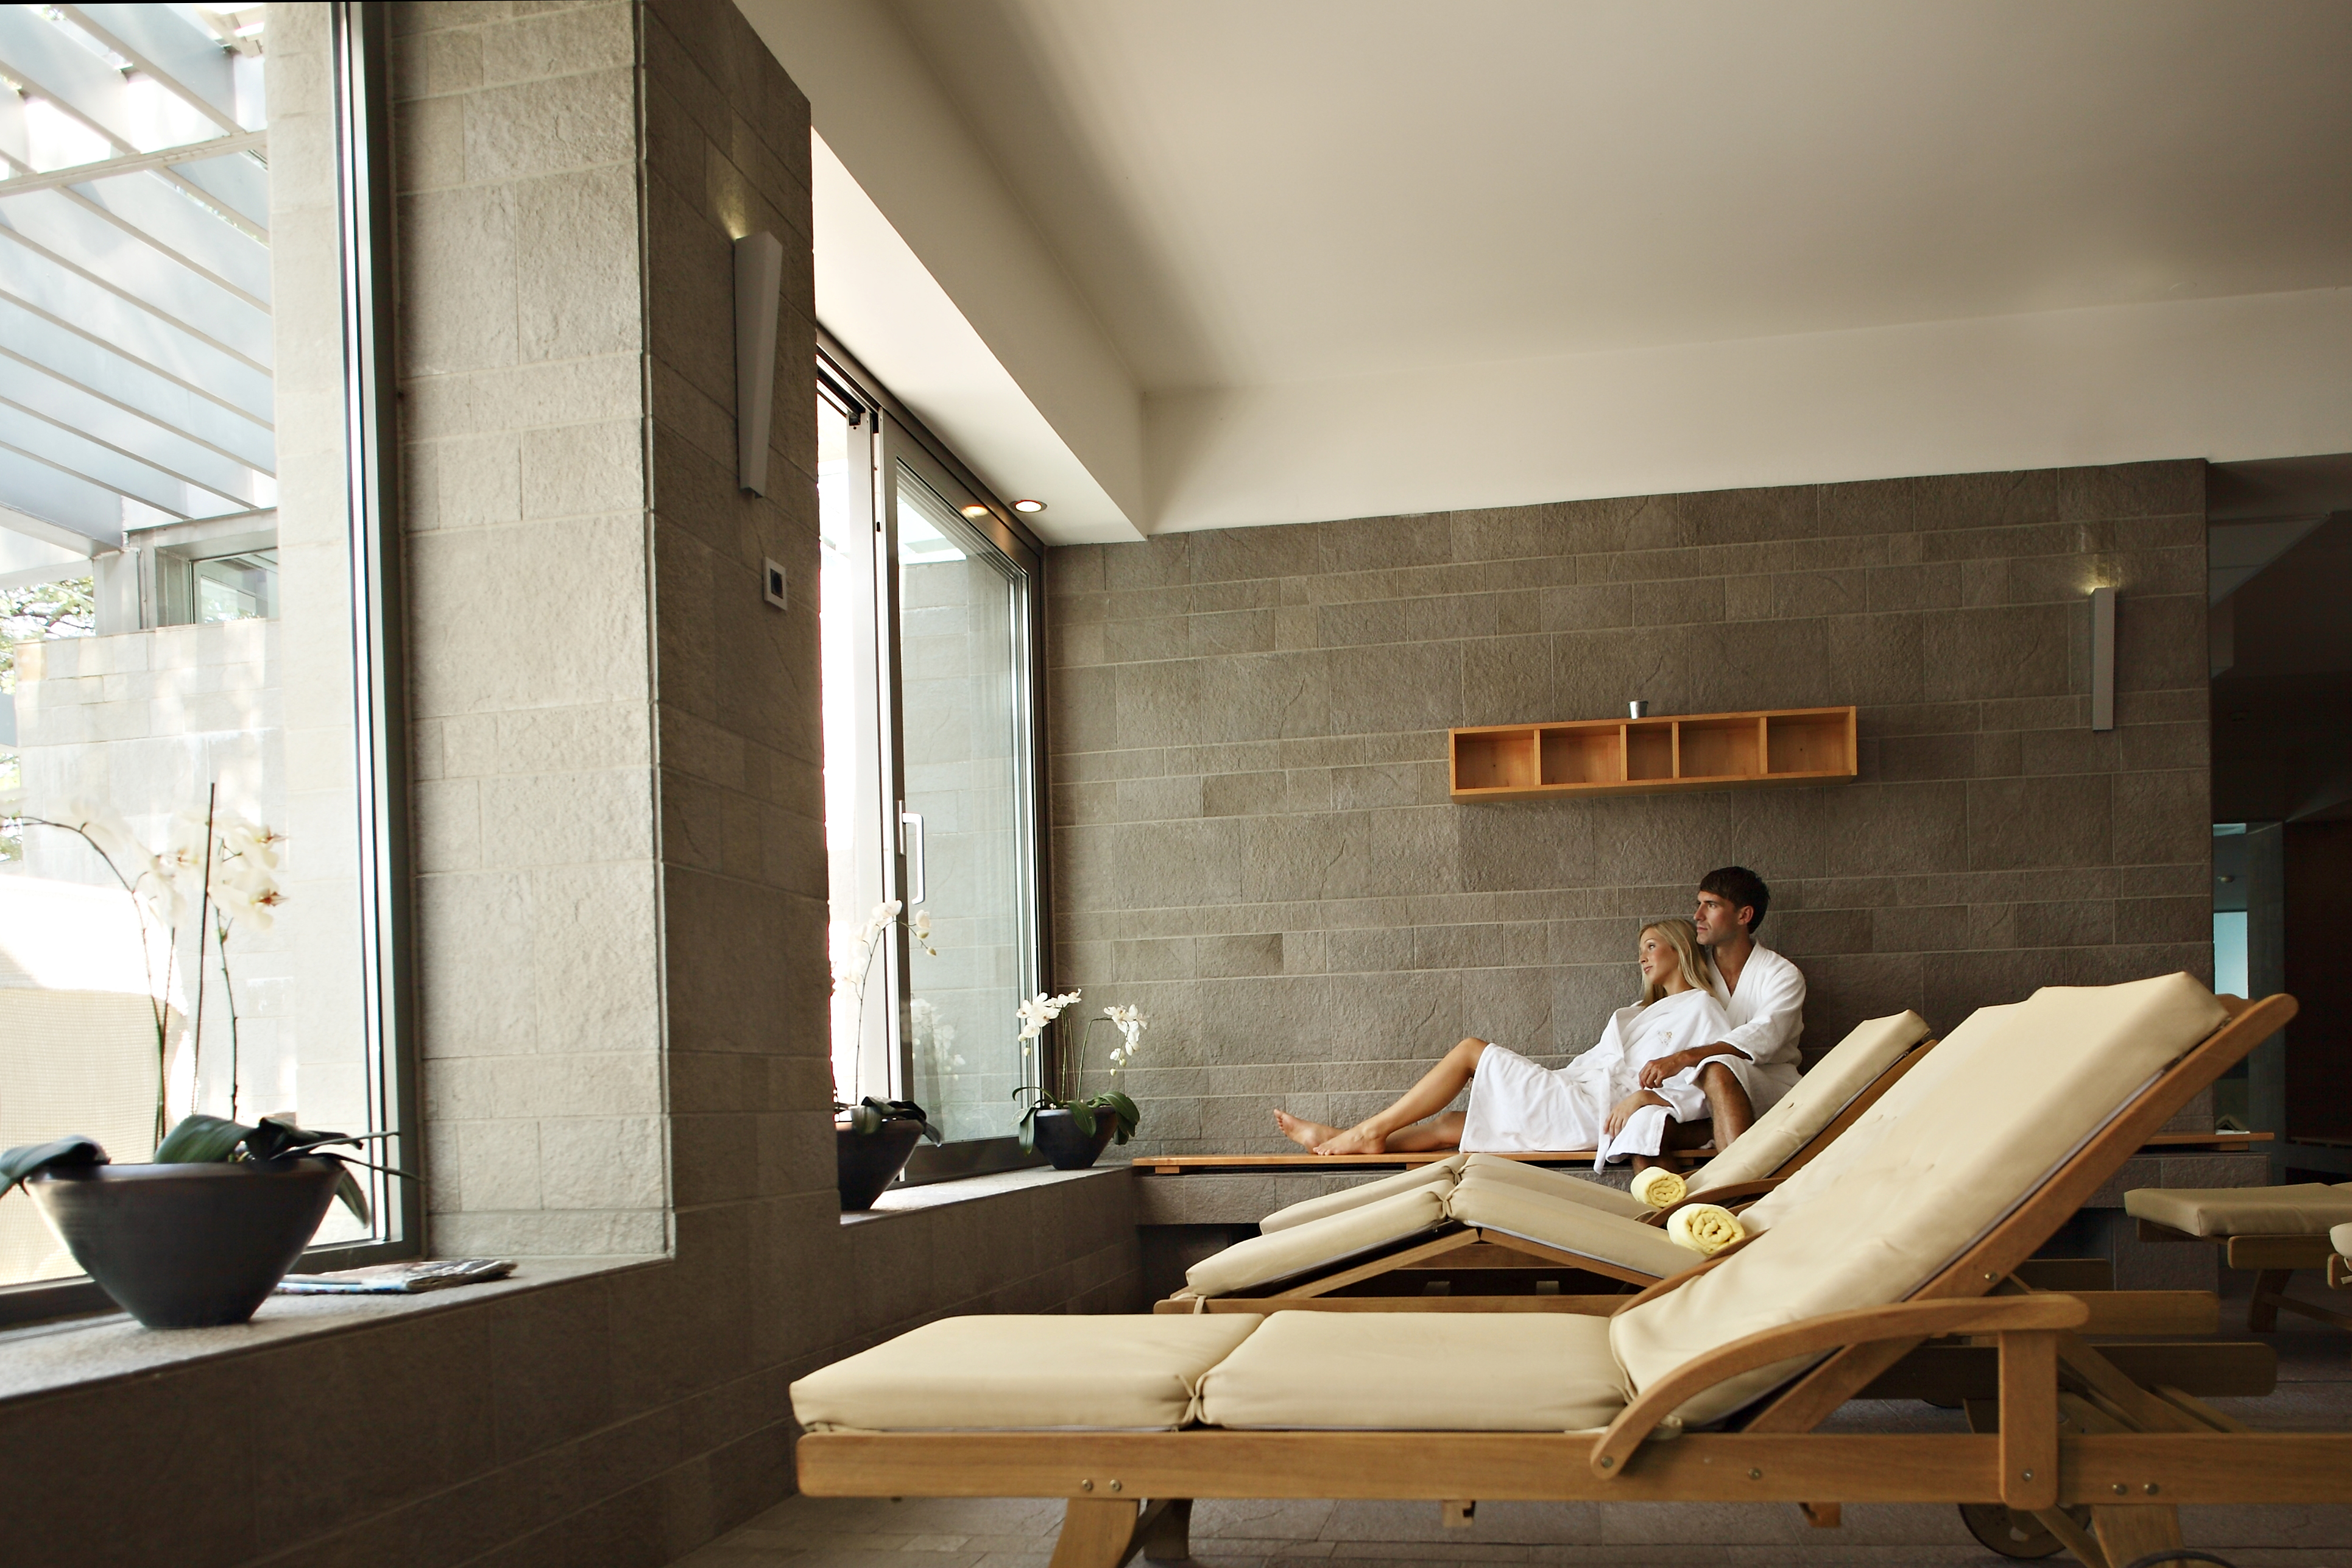 Pampering at the Živa Wellness Centre